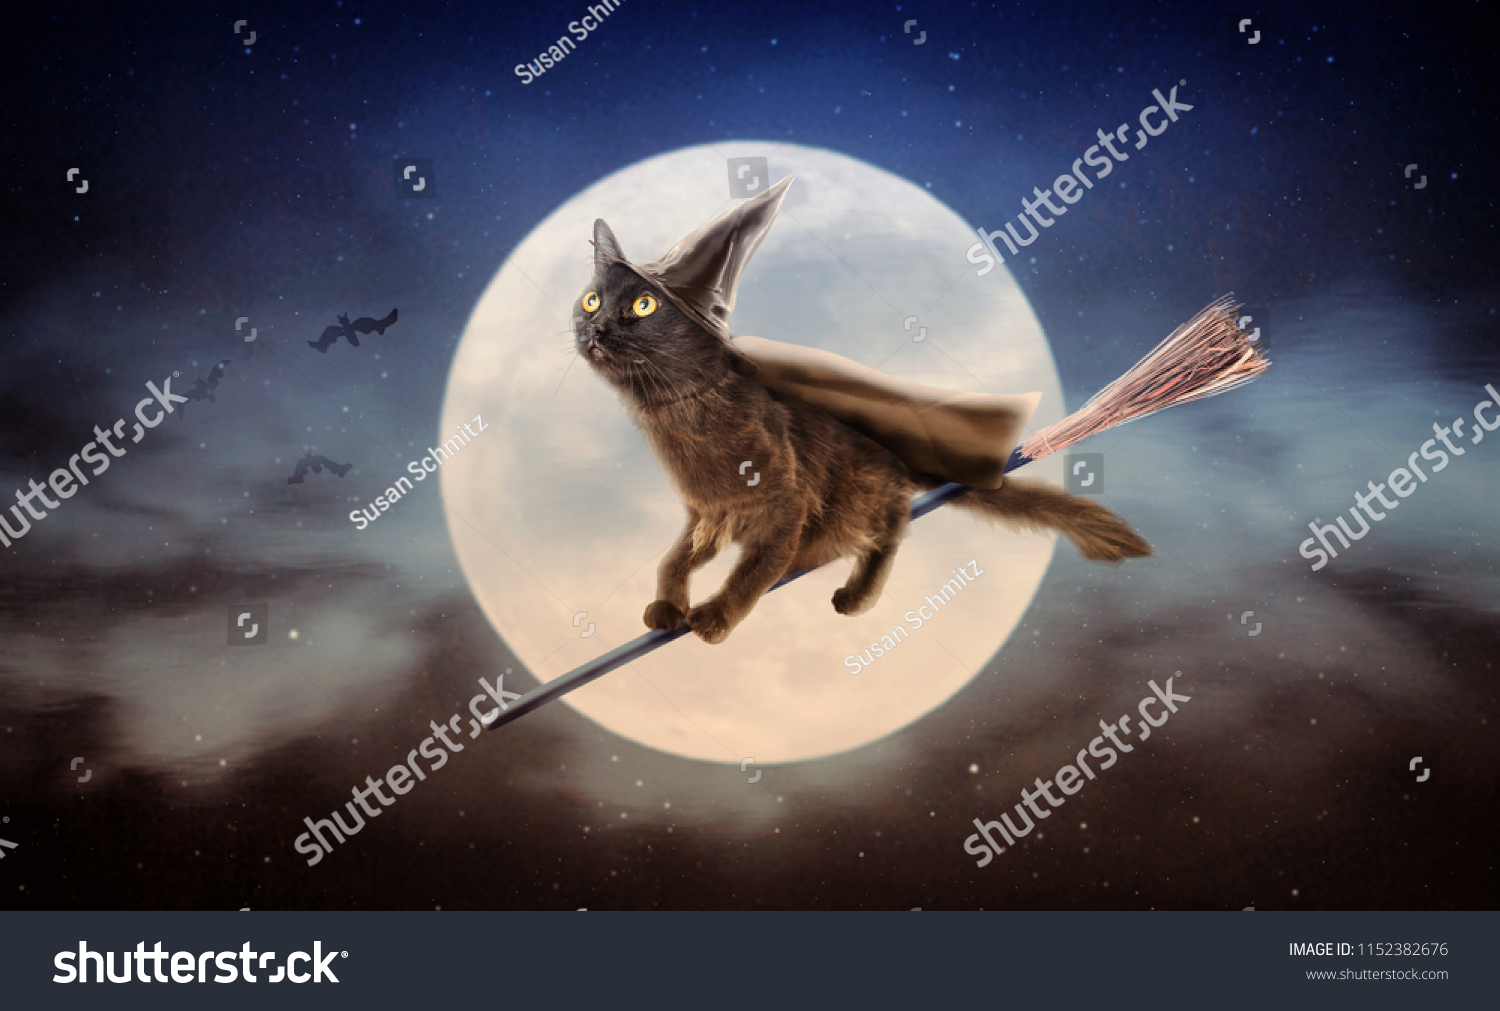 Cute black cat dressed as Halloween witch flying on broom in night sky in front of full moon #1152382676